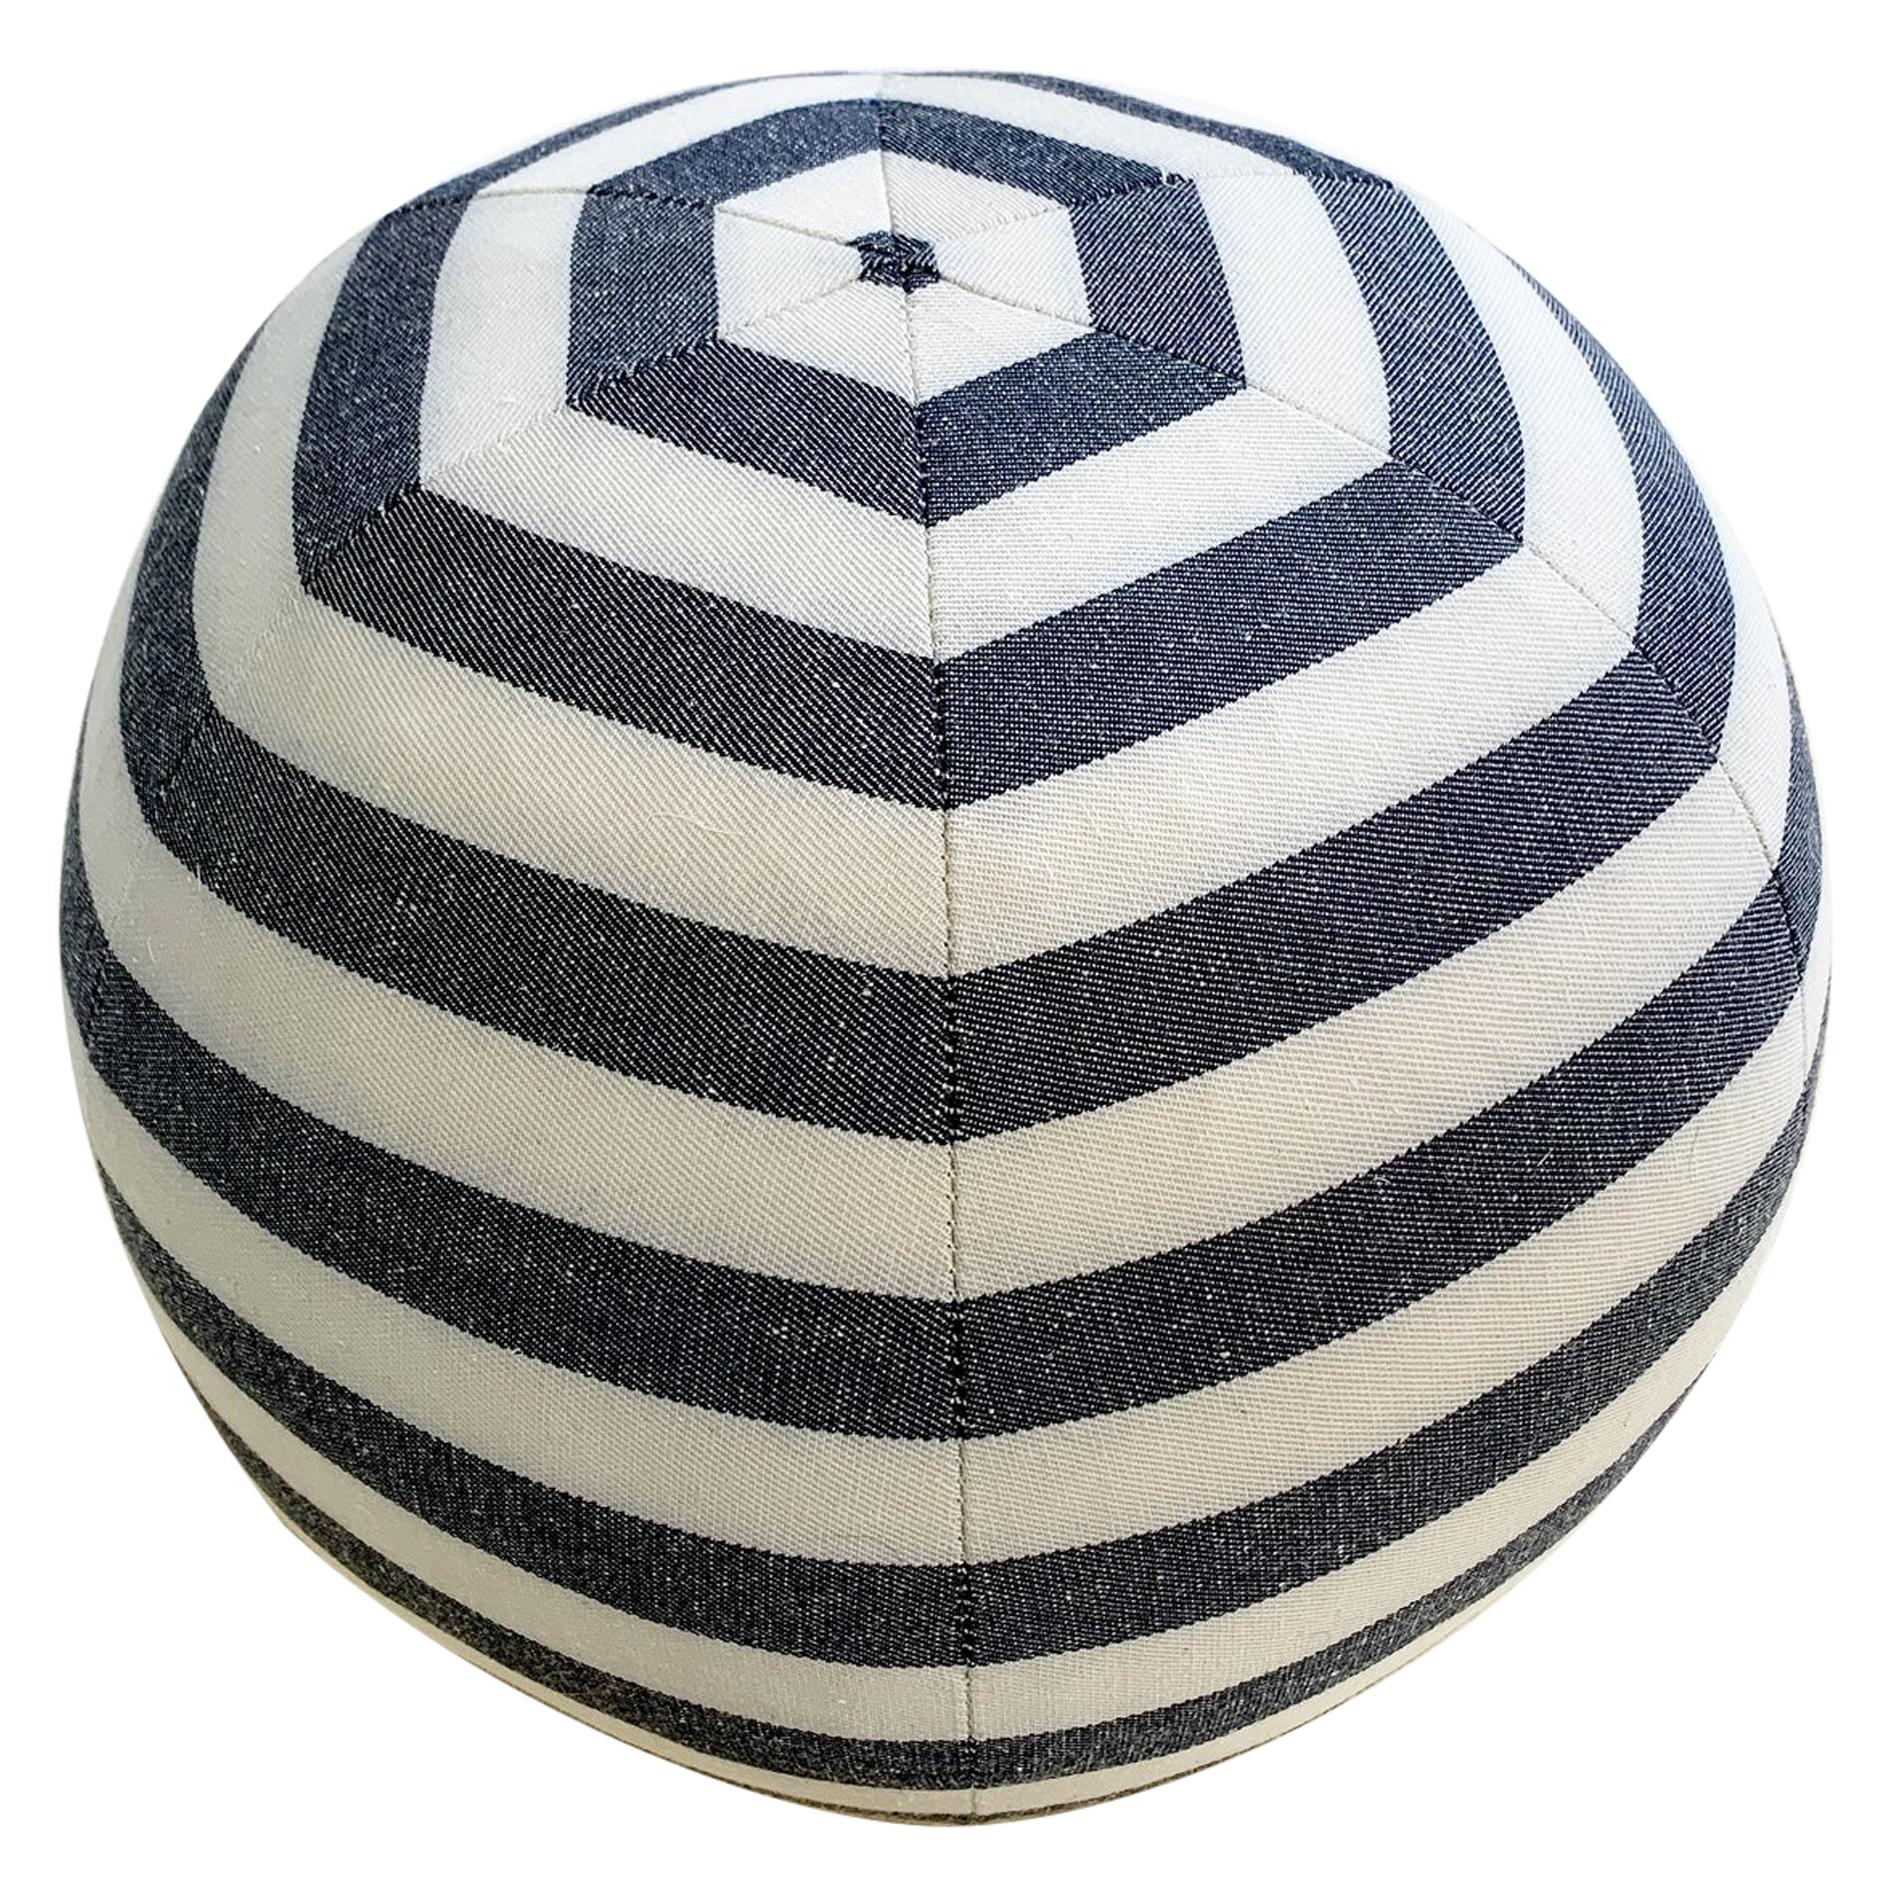 KULE x Forsyth Collection Ball Pillow